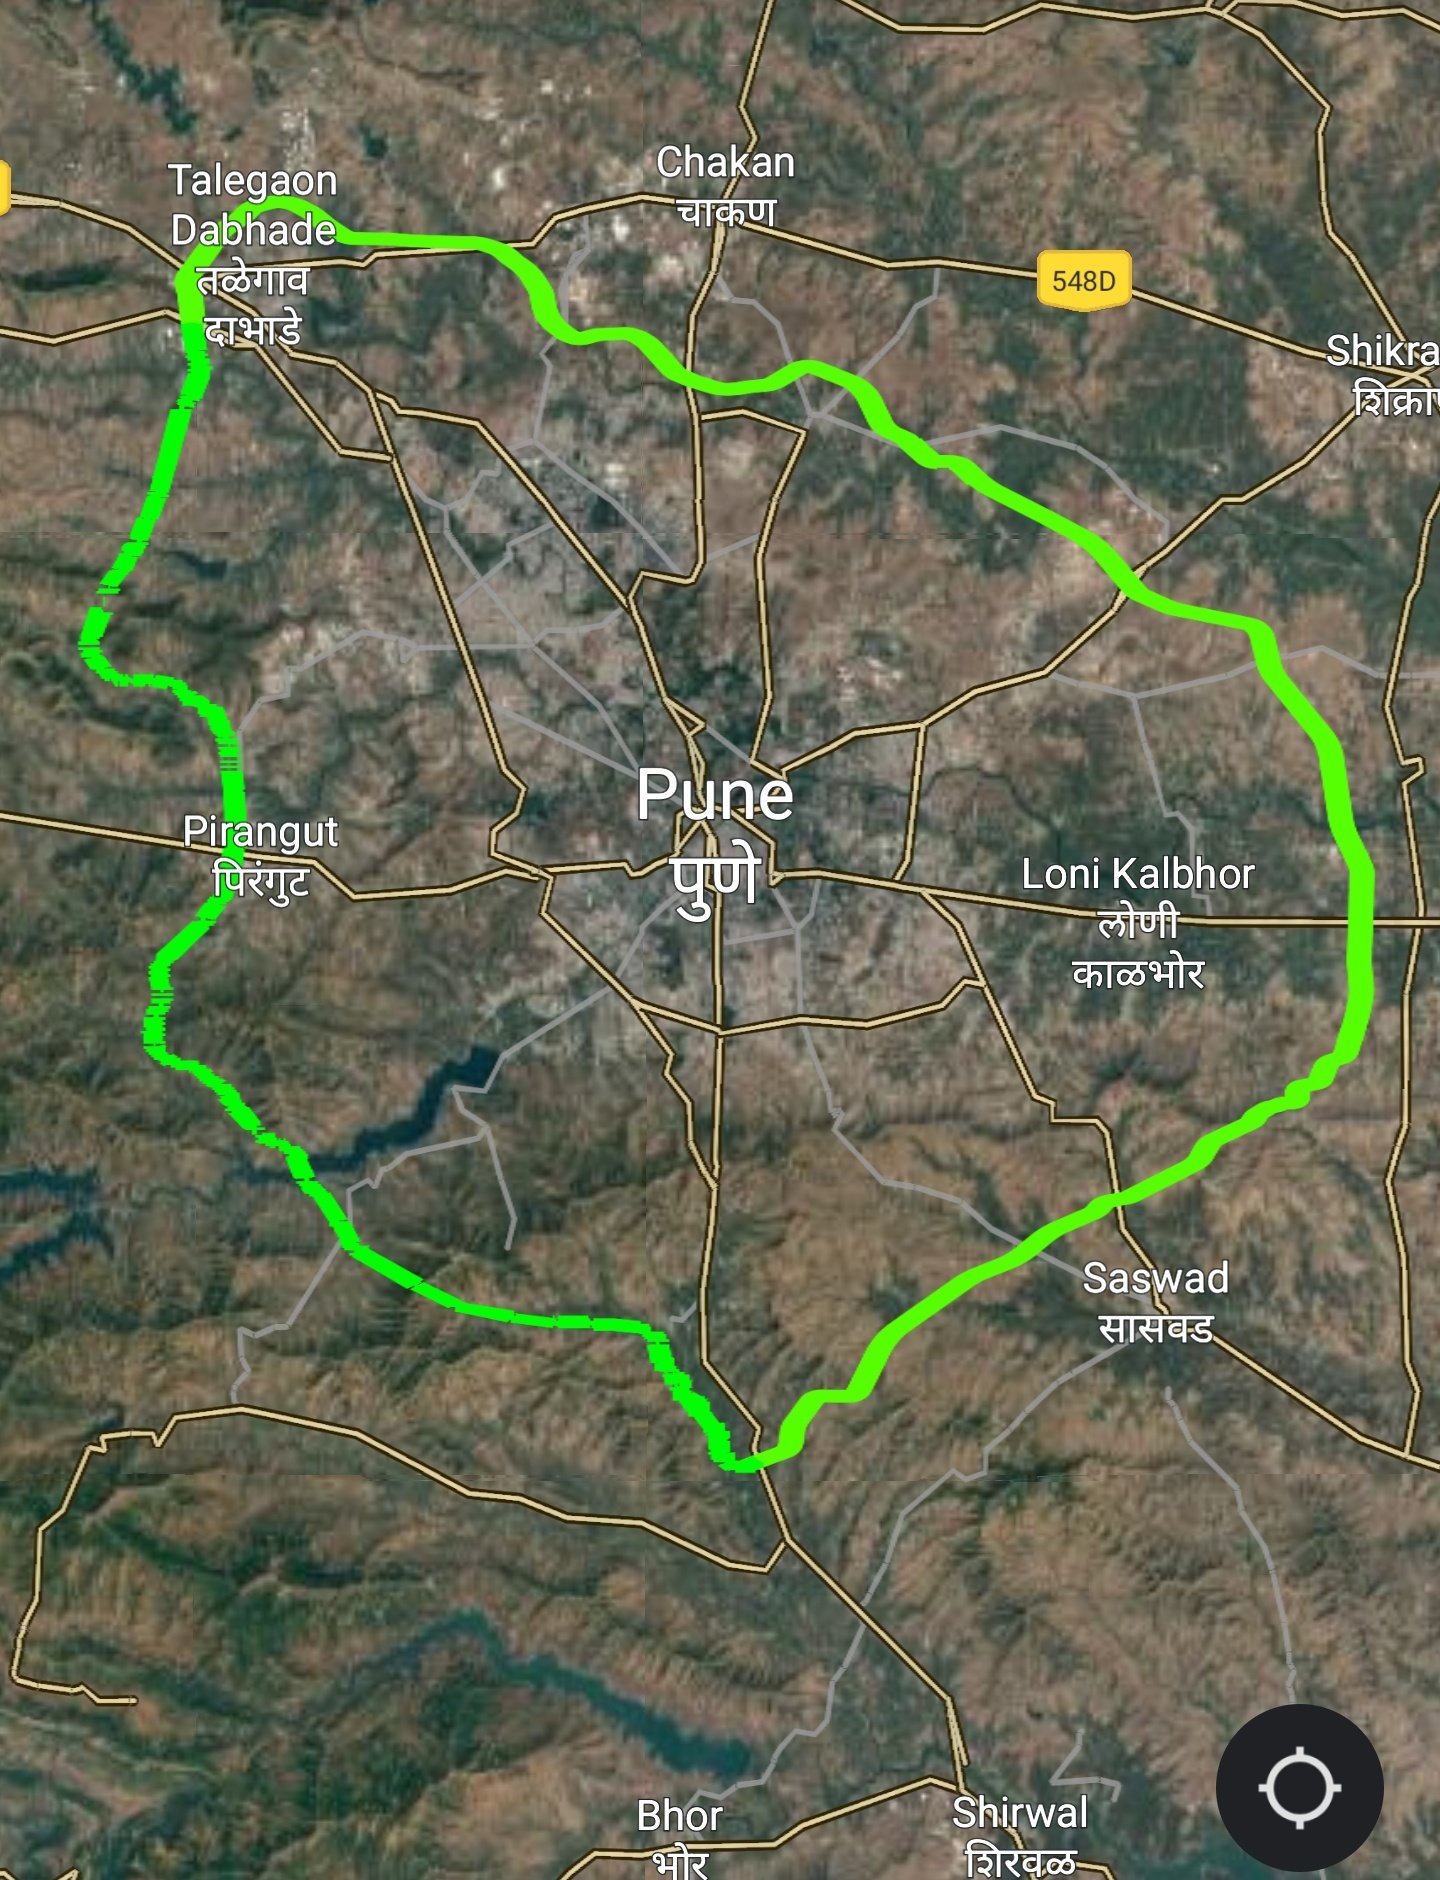 Surat to get second ring road, about 15 km away from city | DeshGujarat